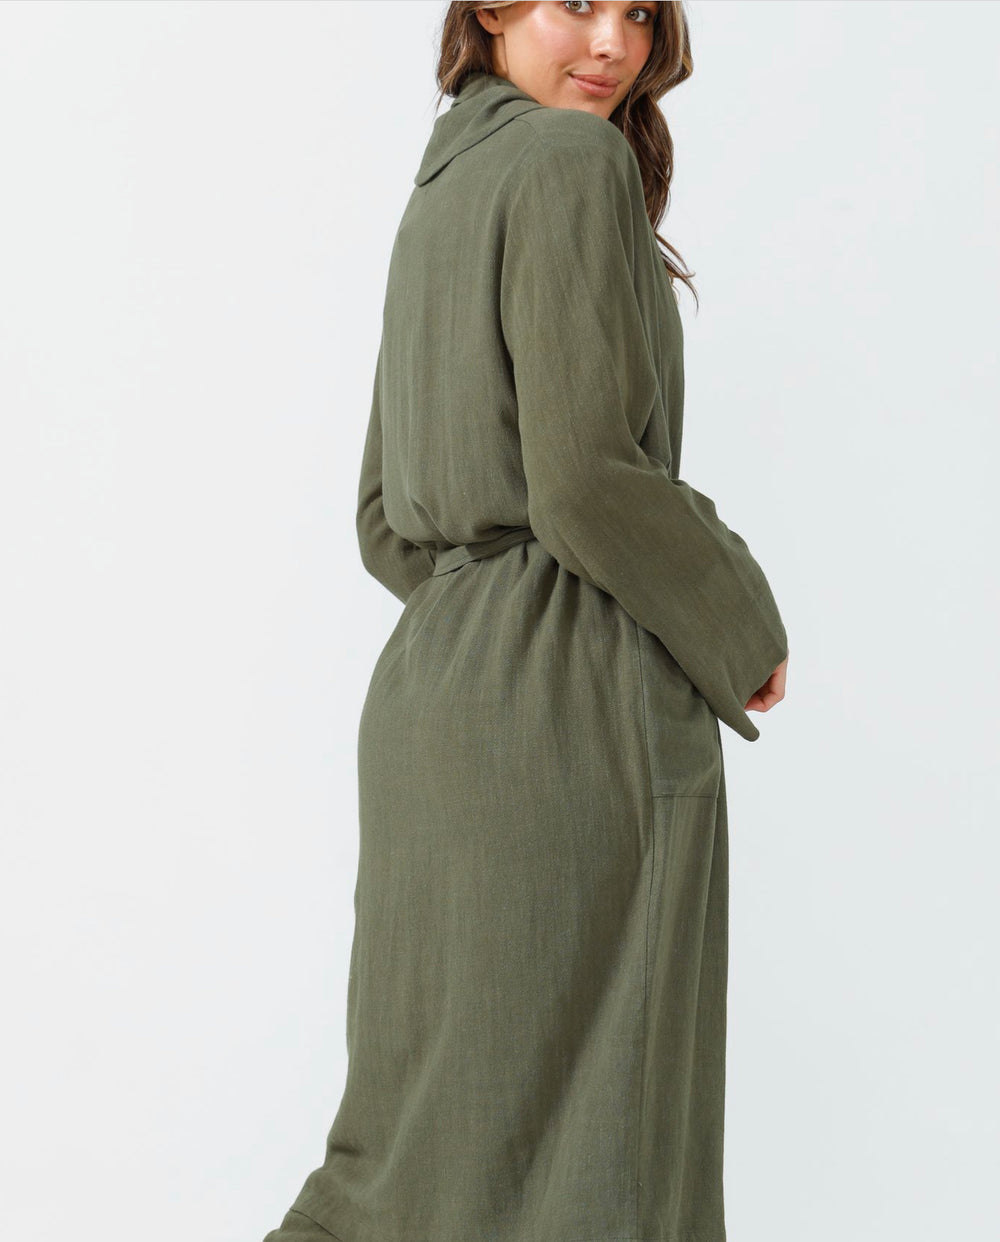 Stay at Home Winter Set Robe - Olive sleepwear Homelove   